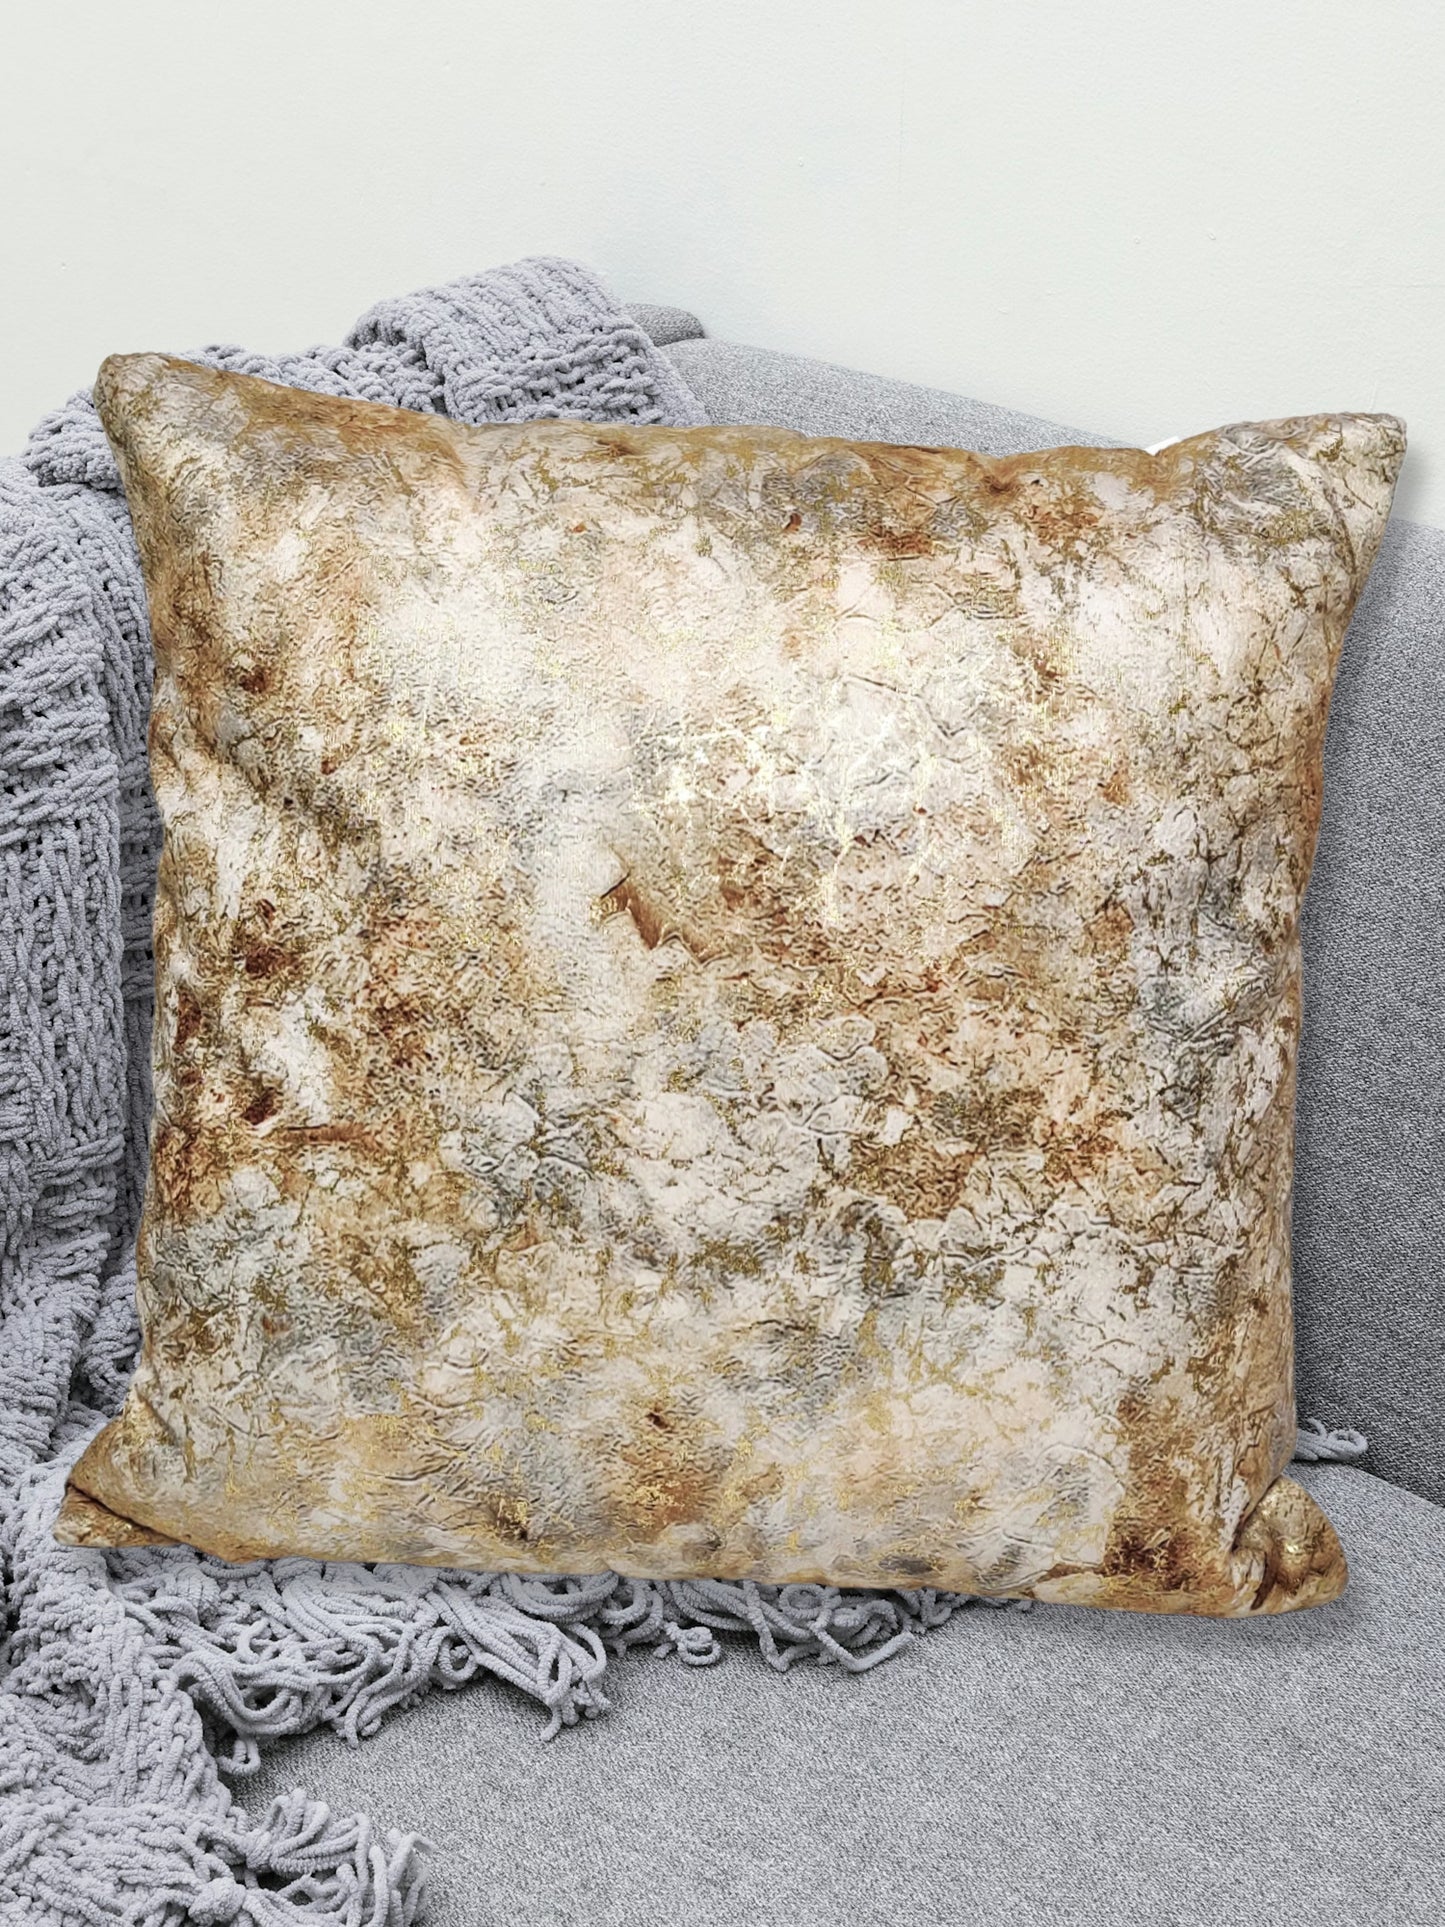 ARTSY® Beige Textured Cushion Cover Set - Pack of 5: Elegant Home Decor Accent for Any Room